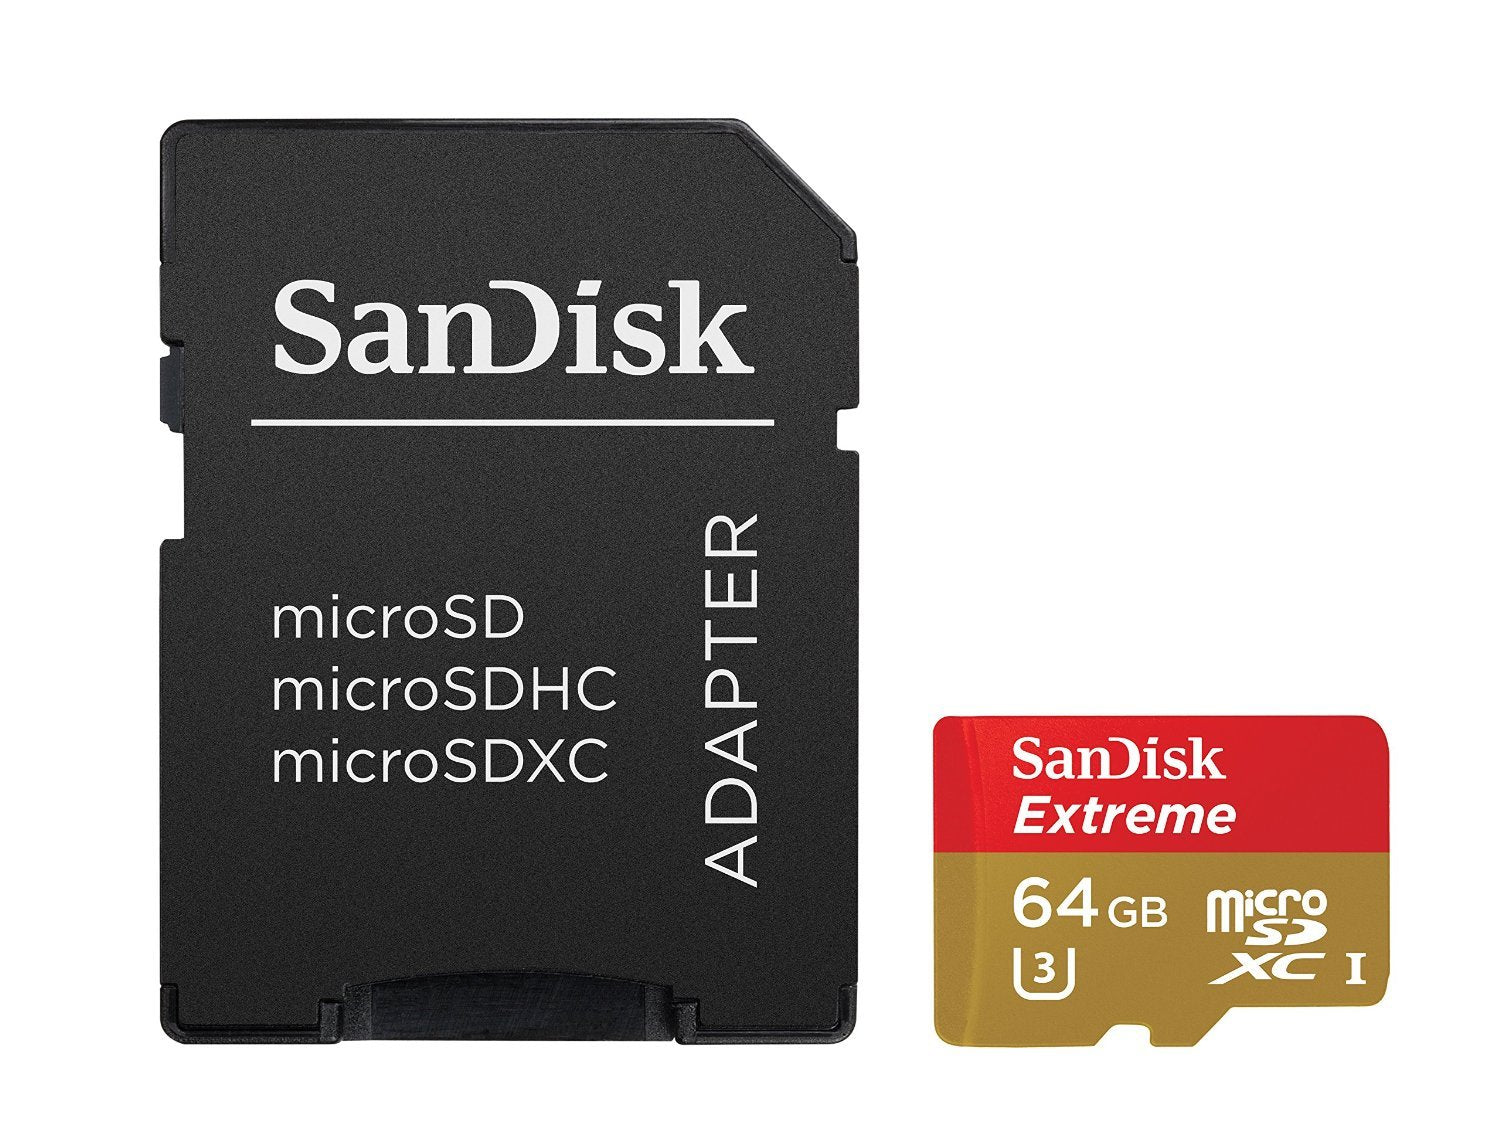 SanDisk Extreme 64GB microSDXC UHS-I Card with Adapter (SDSQXNE-064G-GN6MA)